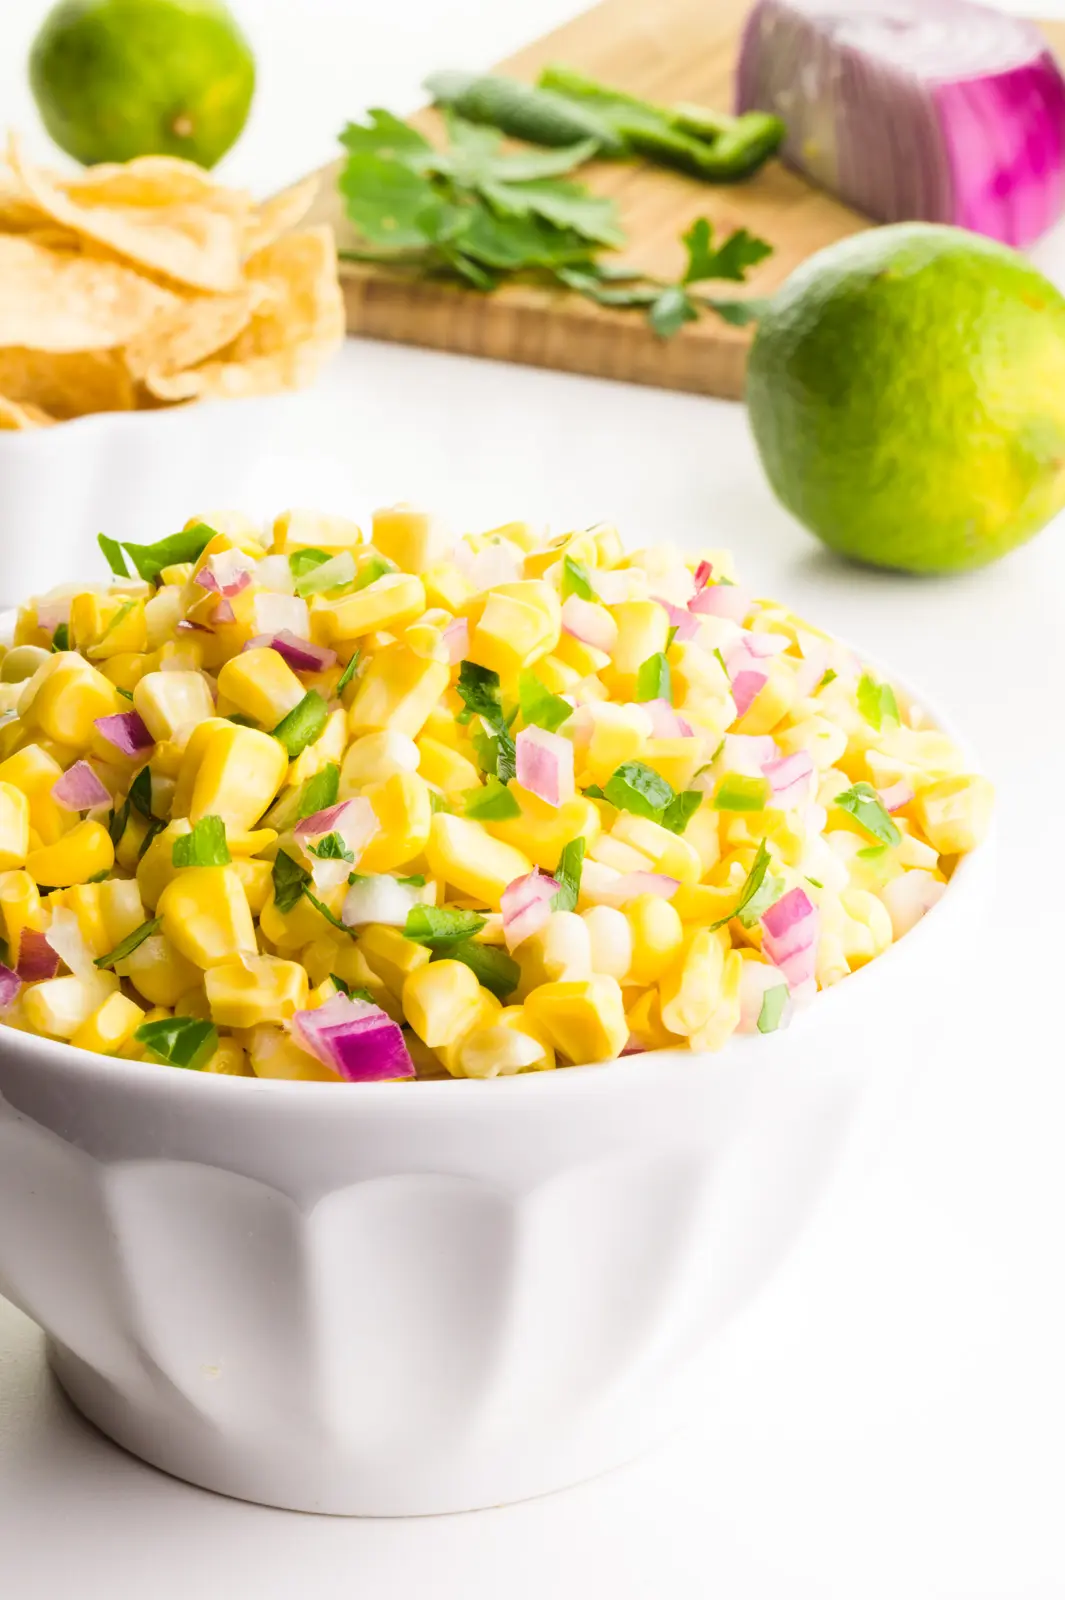 A bowl holds corn salsa. There's a cutting board with ingredients in the background, limes, and a another bowl of tortilla chips.